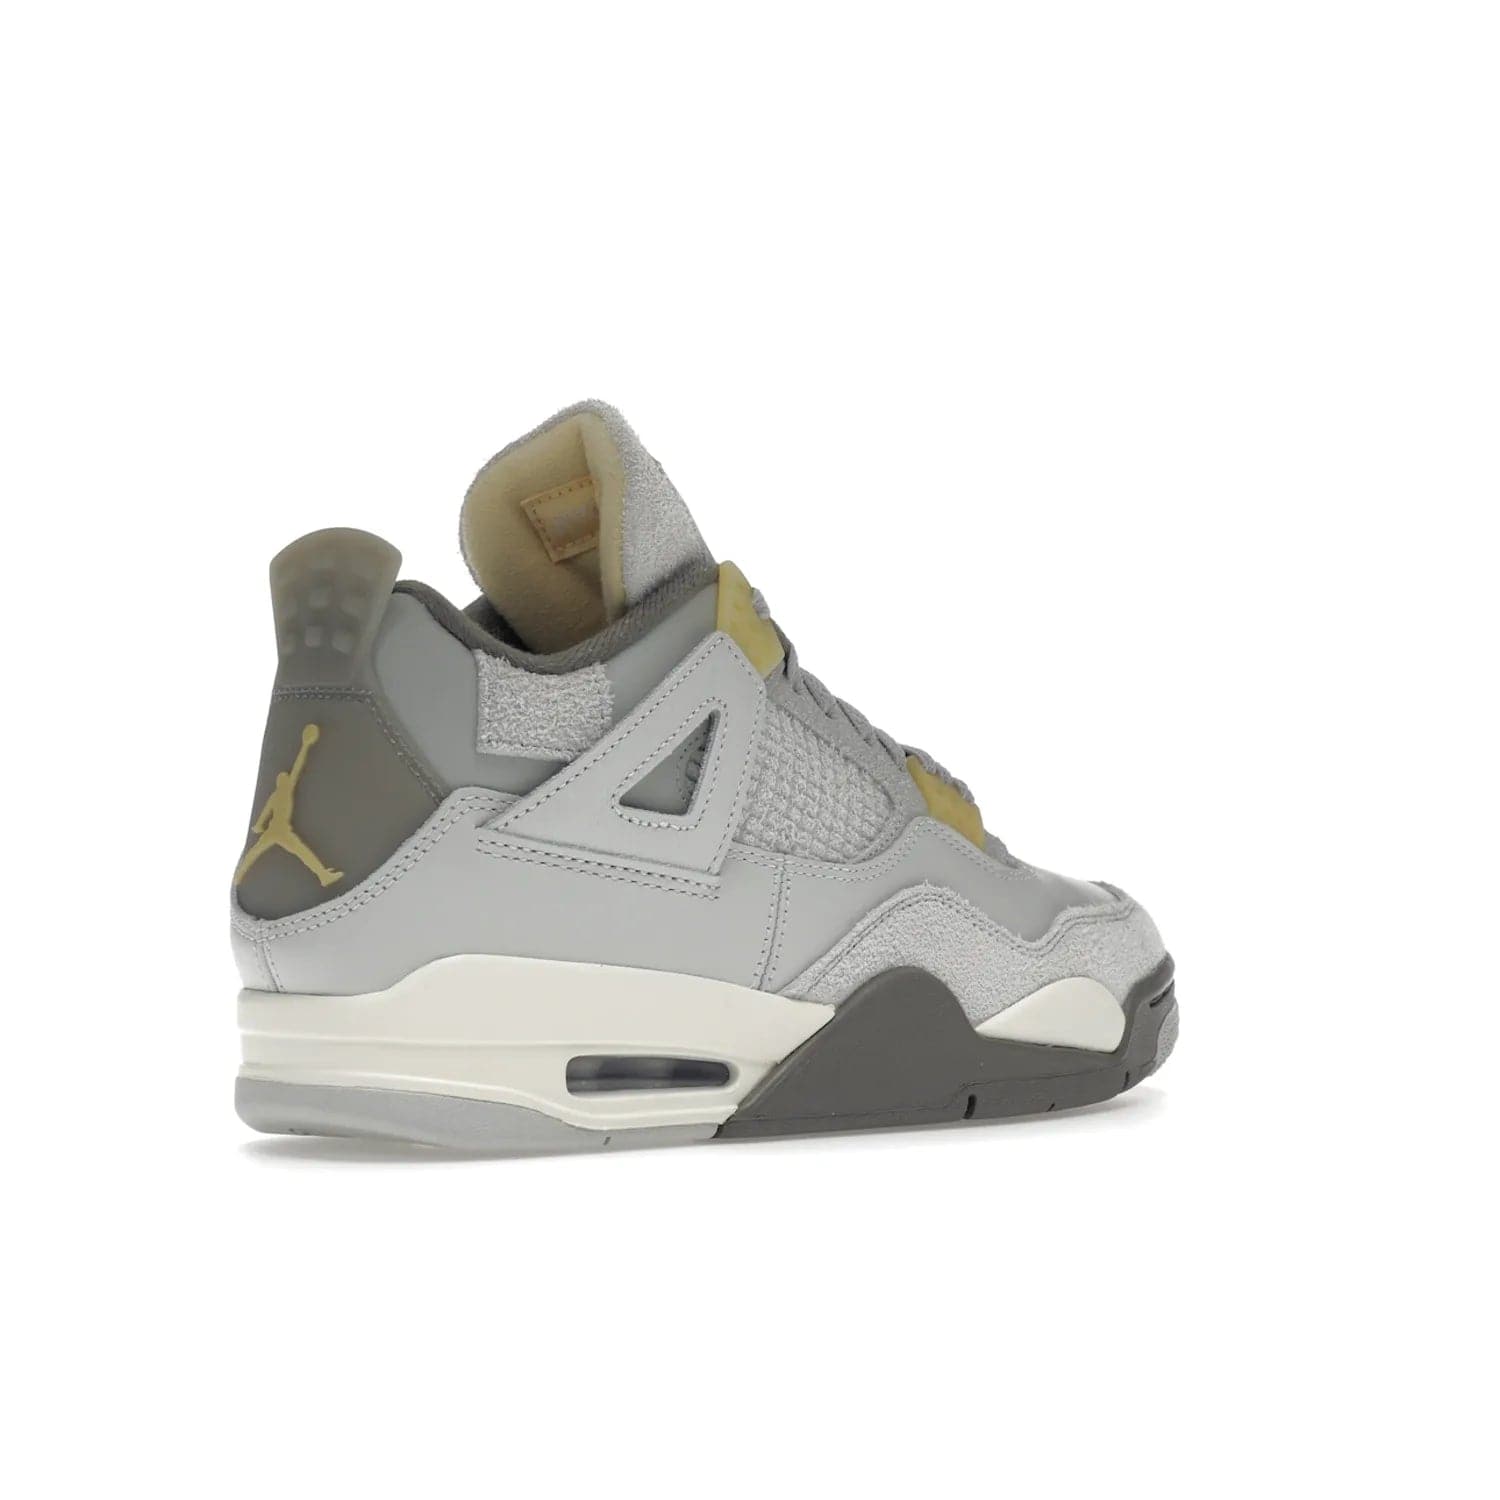 Jordan 4 Retro SE Craft Photon Dust - Image 33 - Only at www.BallersClubKickz.com - Upgrade your shoe collection with the Air Jordan 4 Retro SE Craft Photon Dust. This luxurious sneaker features a combination of suede and leather with unique grey tones like Photon Dust, Pale Vanilla, Off White, Grey Fog, Flat Pewter, and Sail. Available February 11, 2023.